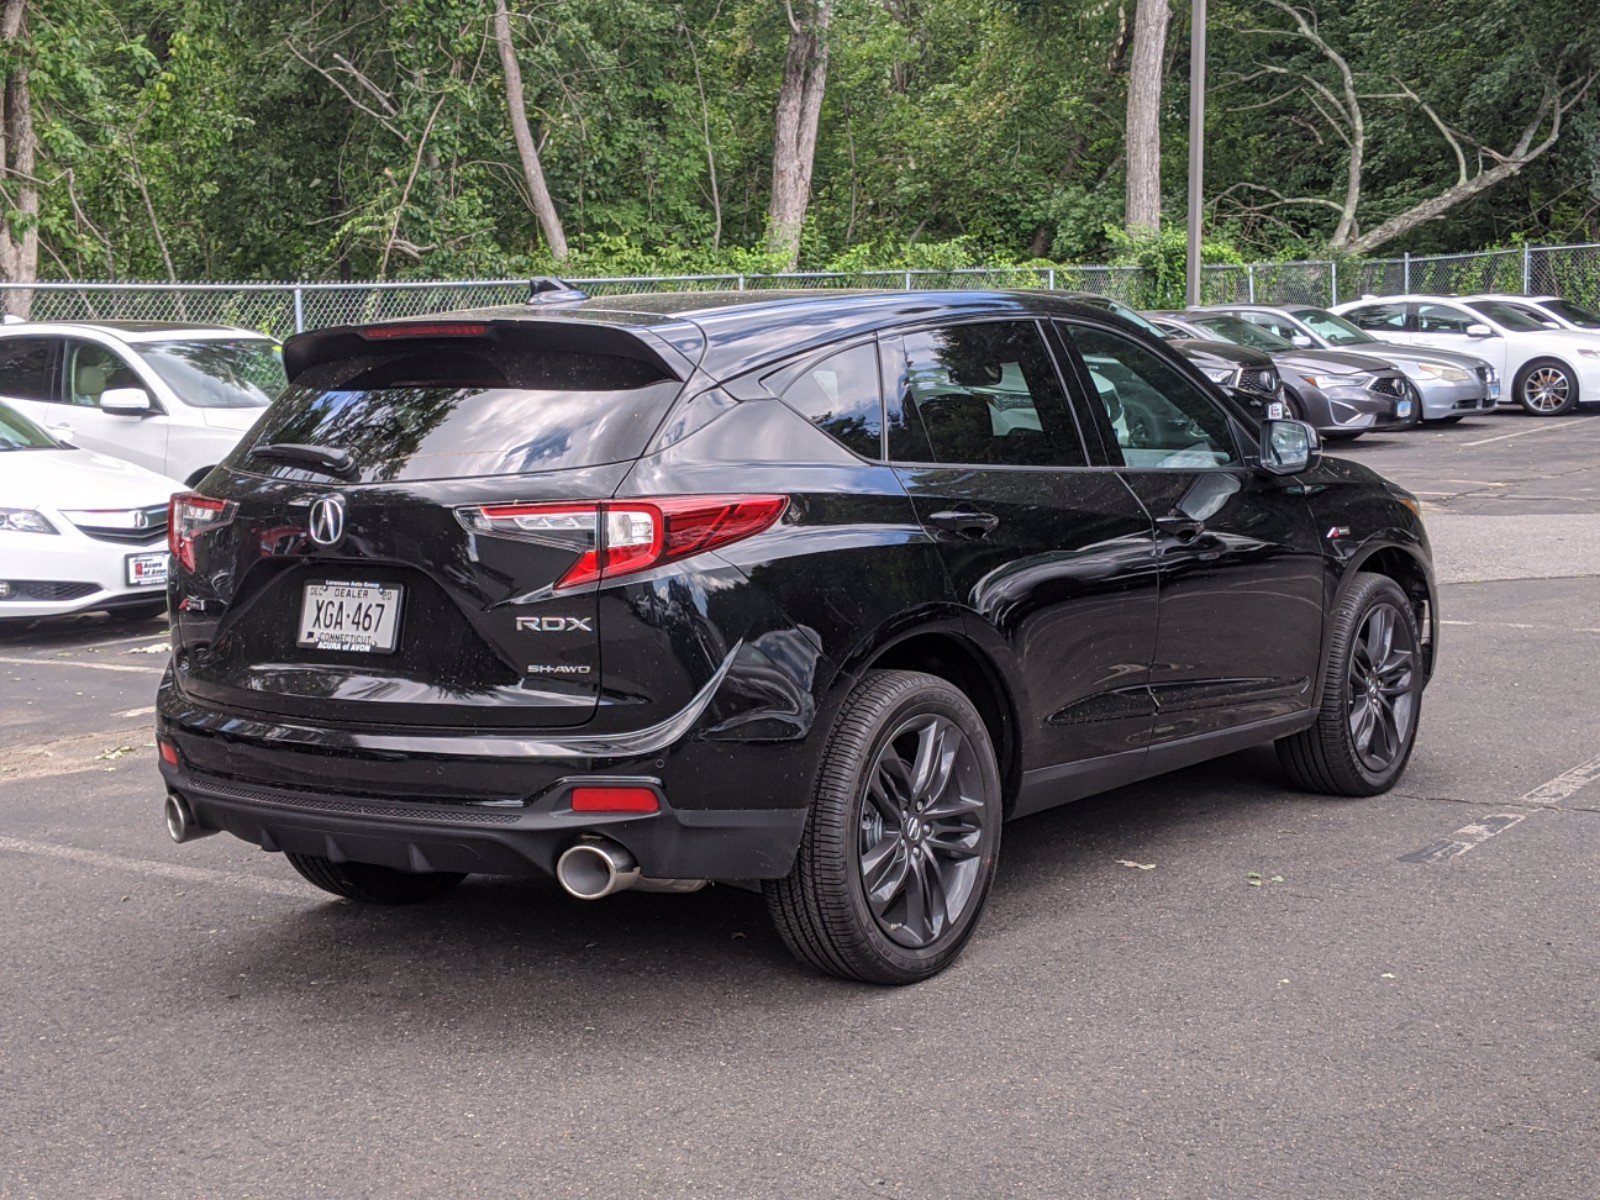 New 2021 Acura RDX SH-AWD with A-Spec Package Sport ...